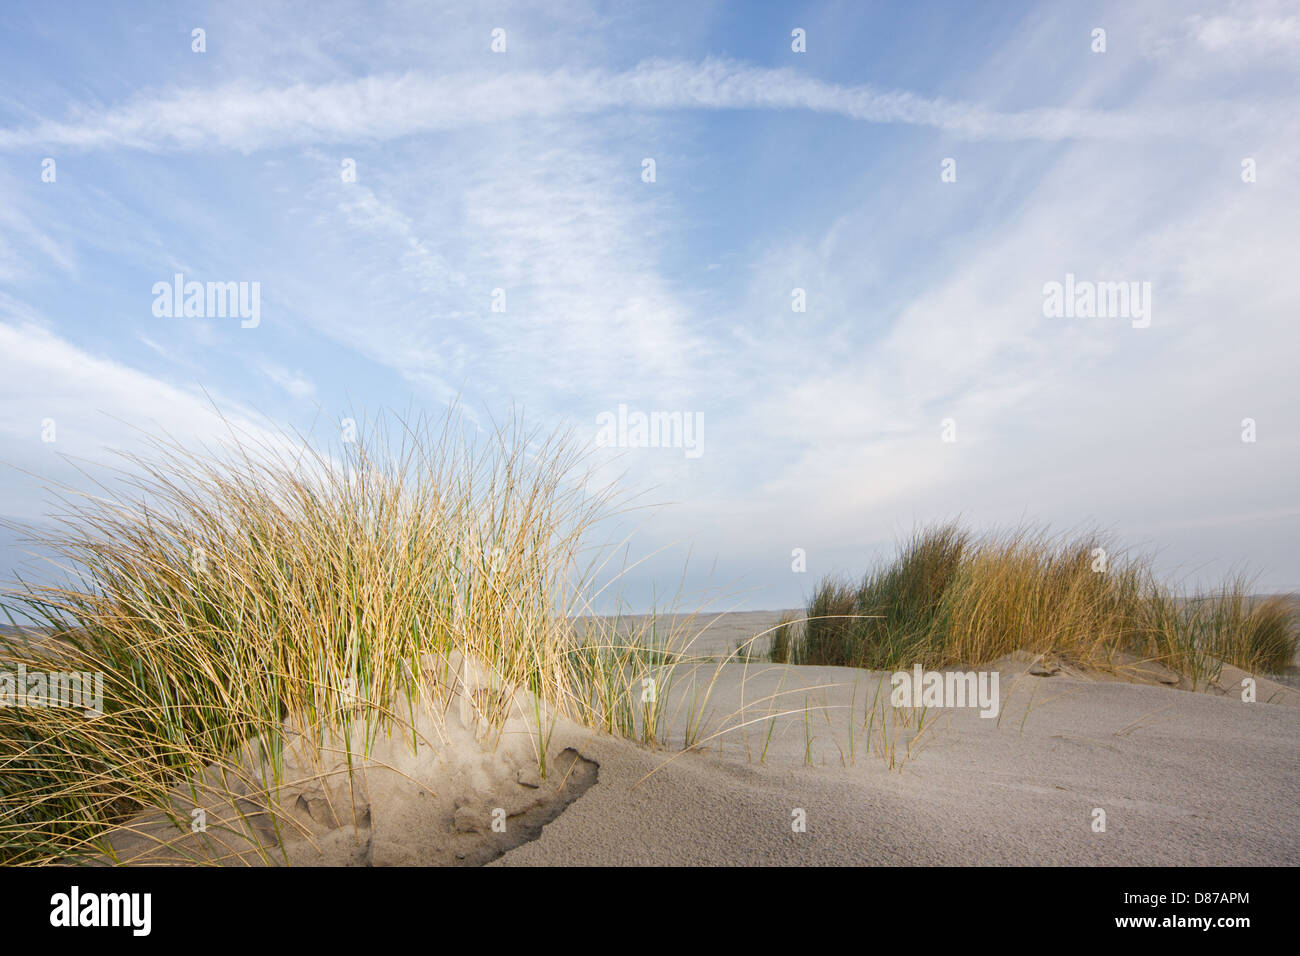 Beachgrass or Marramgrass in the dunes under a blue sky with cirrus clouds Stock Photo